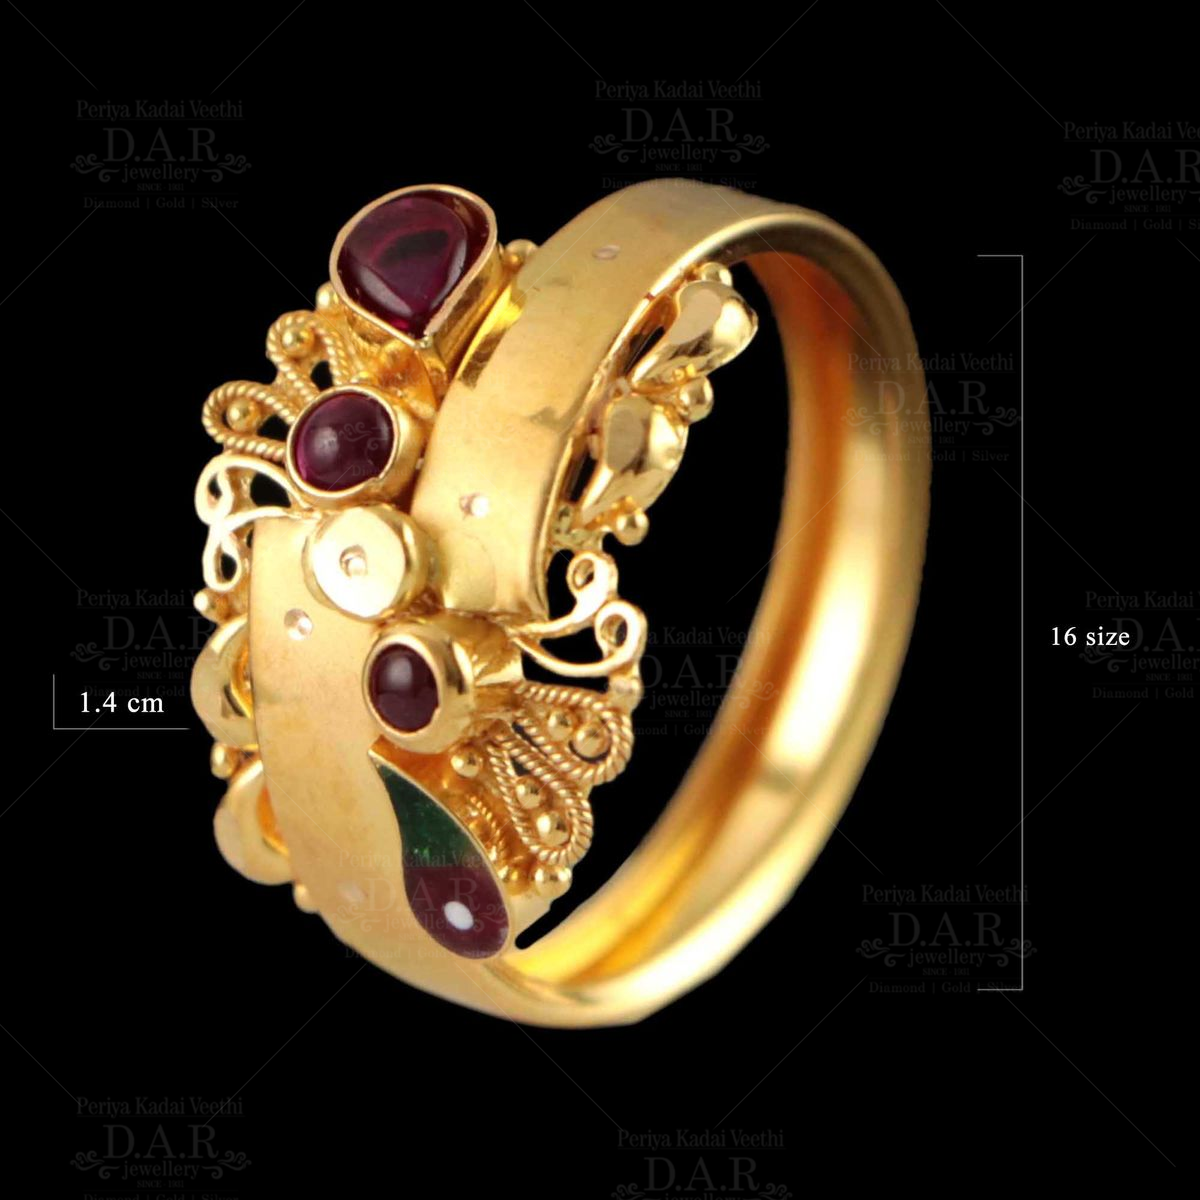 Ladies Fancy Gold Ring Price Starting From Rs 4,500/Gm | Find Verified  Sellers at Justdial